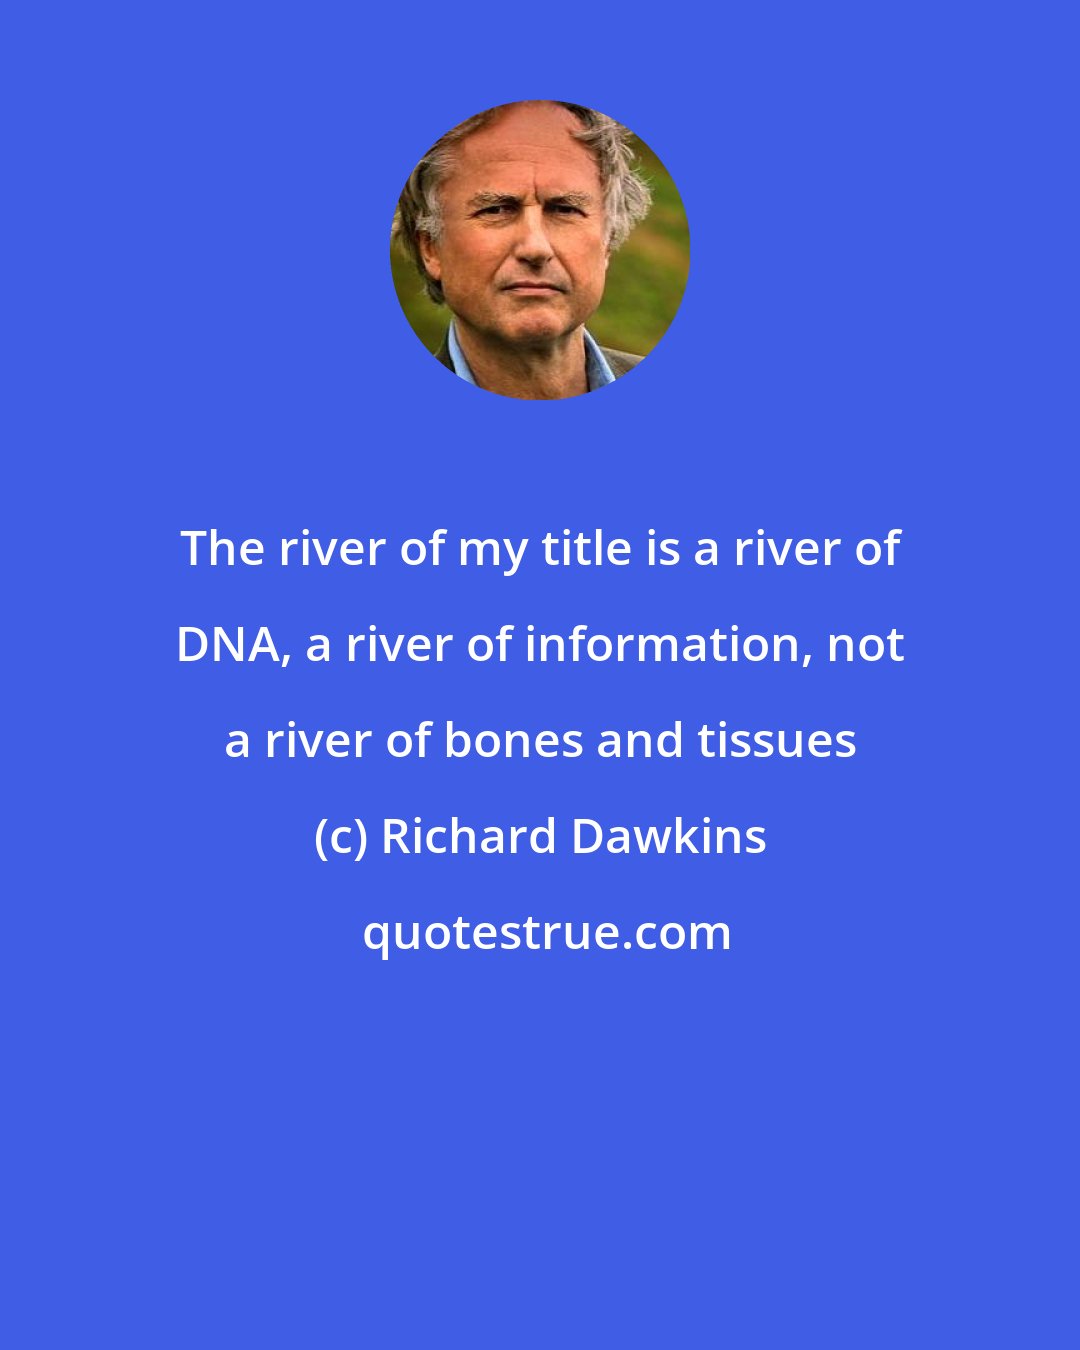 Richard Dawkins: The river of my title is a river of DNA, a river of information, not a river of bones and tissues